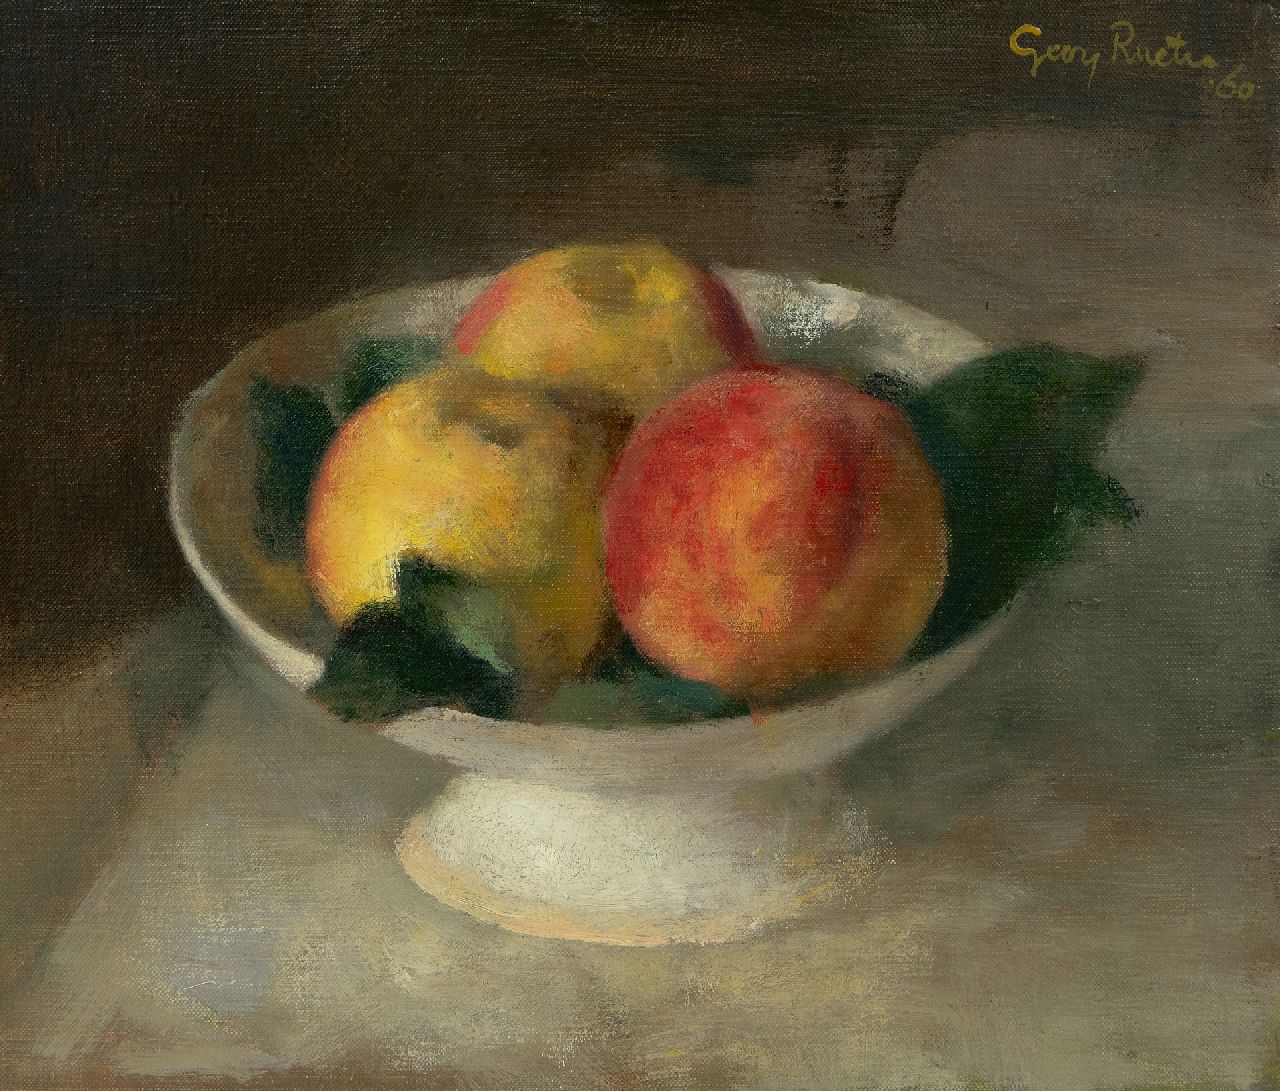 Rueter W.C.G.  | Wilhelm Christian 'Georg' Rueter | Paintings offered for sale | Peaches in white bowl, oil on canvas 28.0 x 32.2 cm, signed u.r. and dated '60